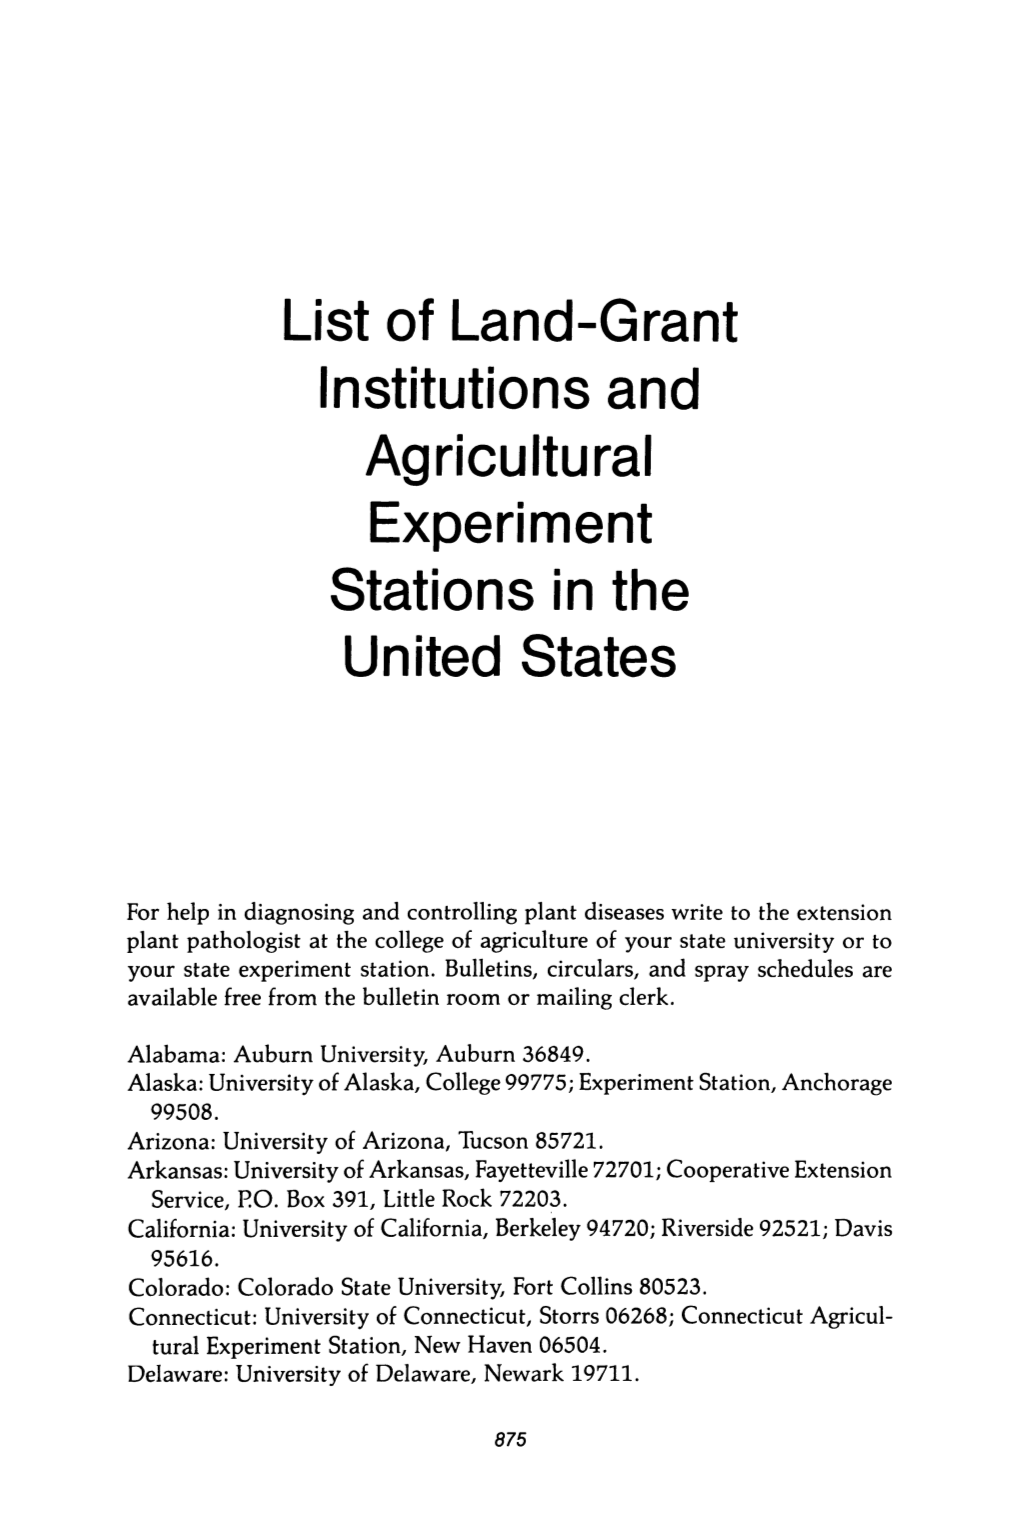 List of Land-Grant Institutions and Agricultural Experiment Stations in the United States